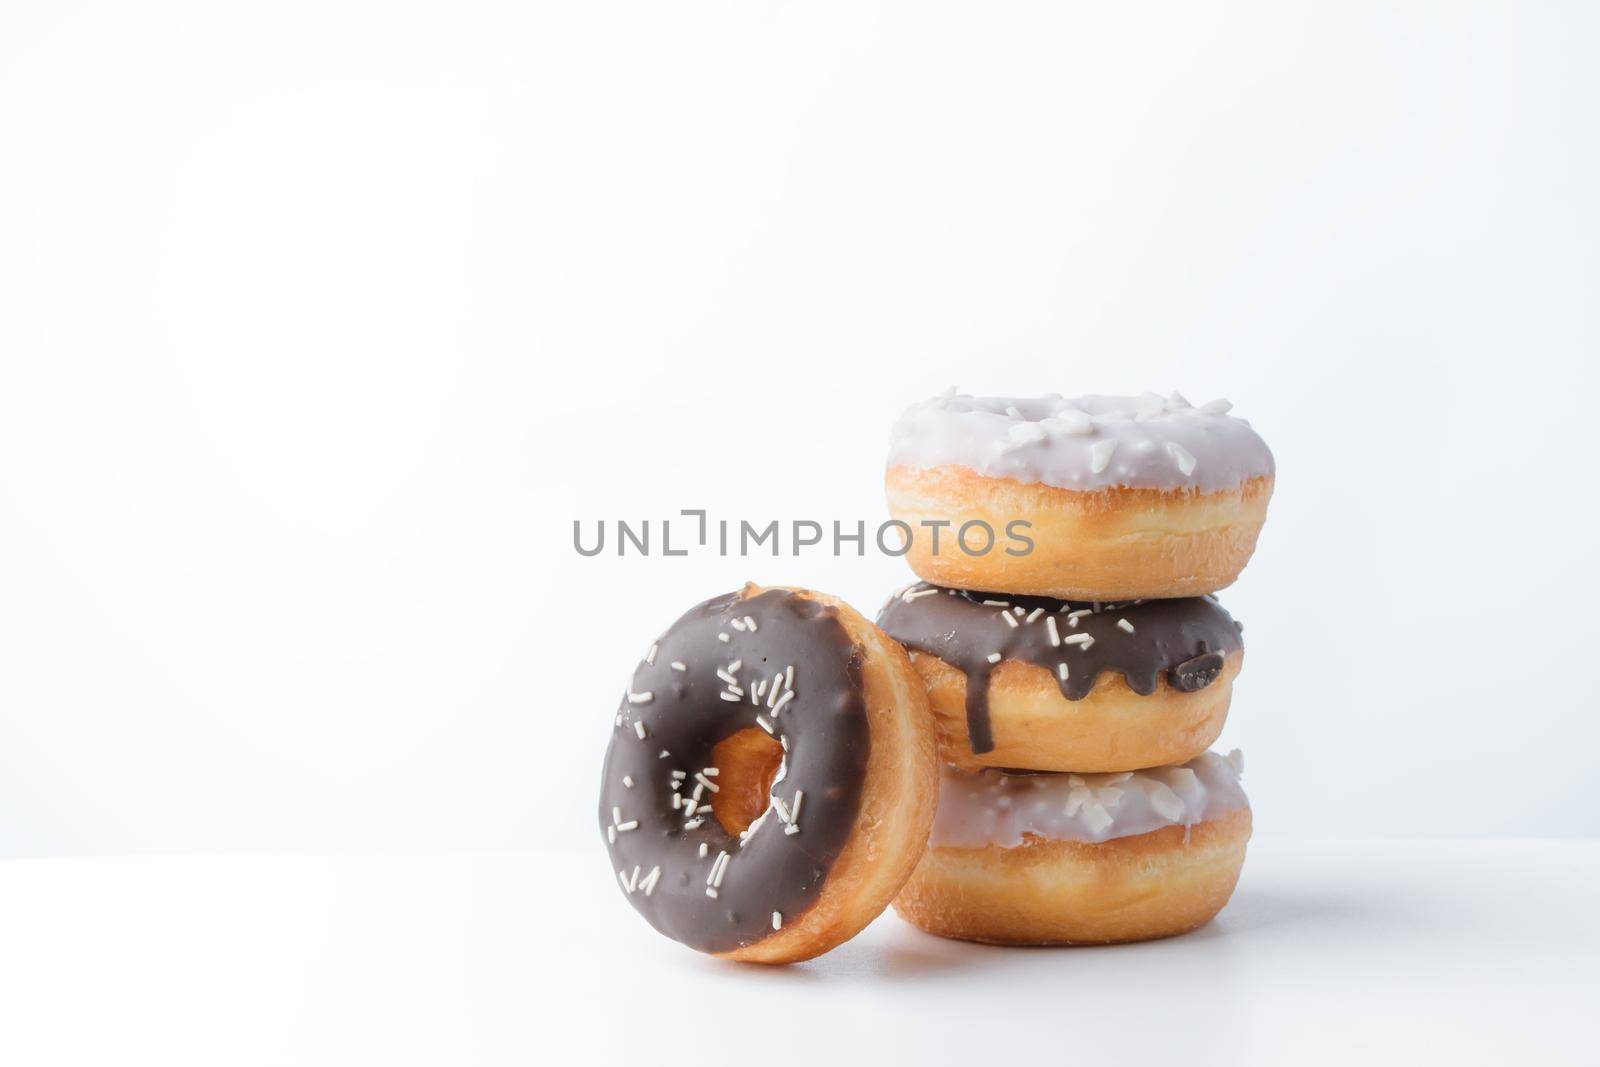 Donuts with dark and white chocolate on a white background